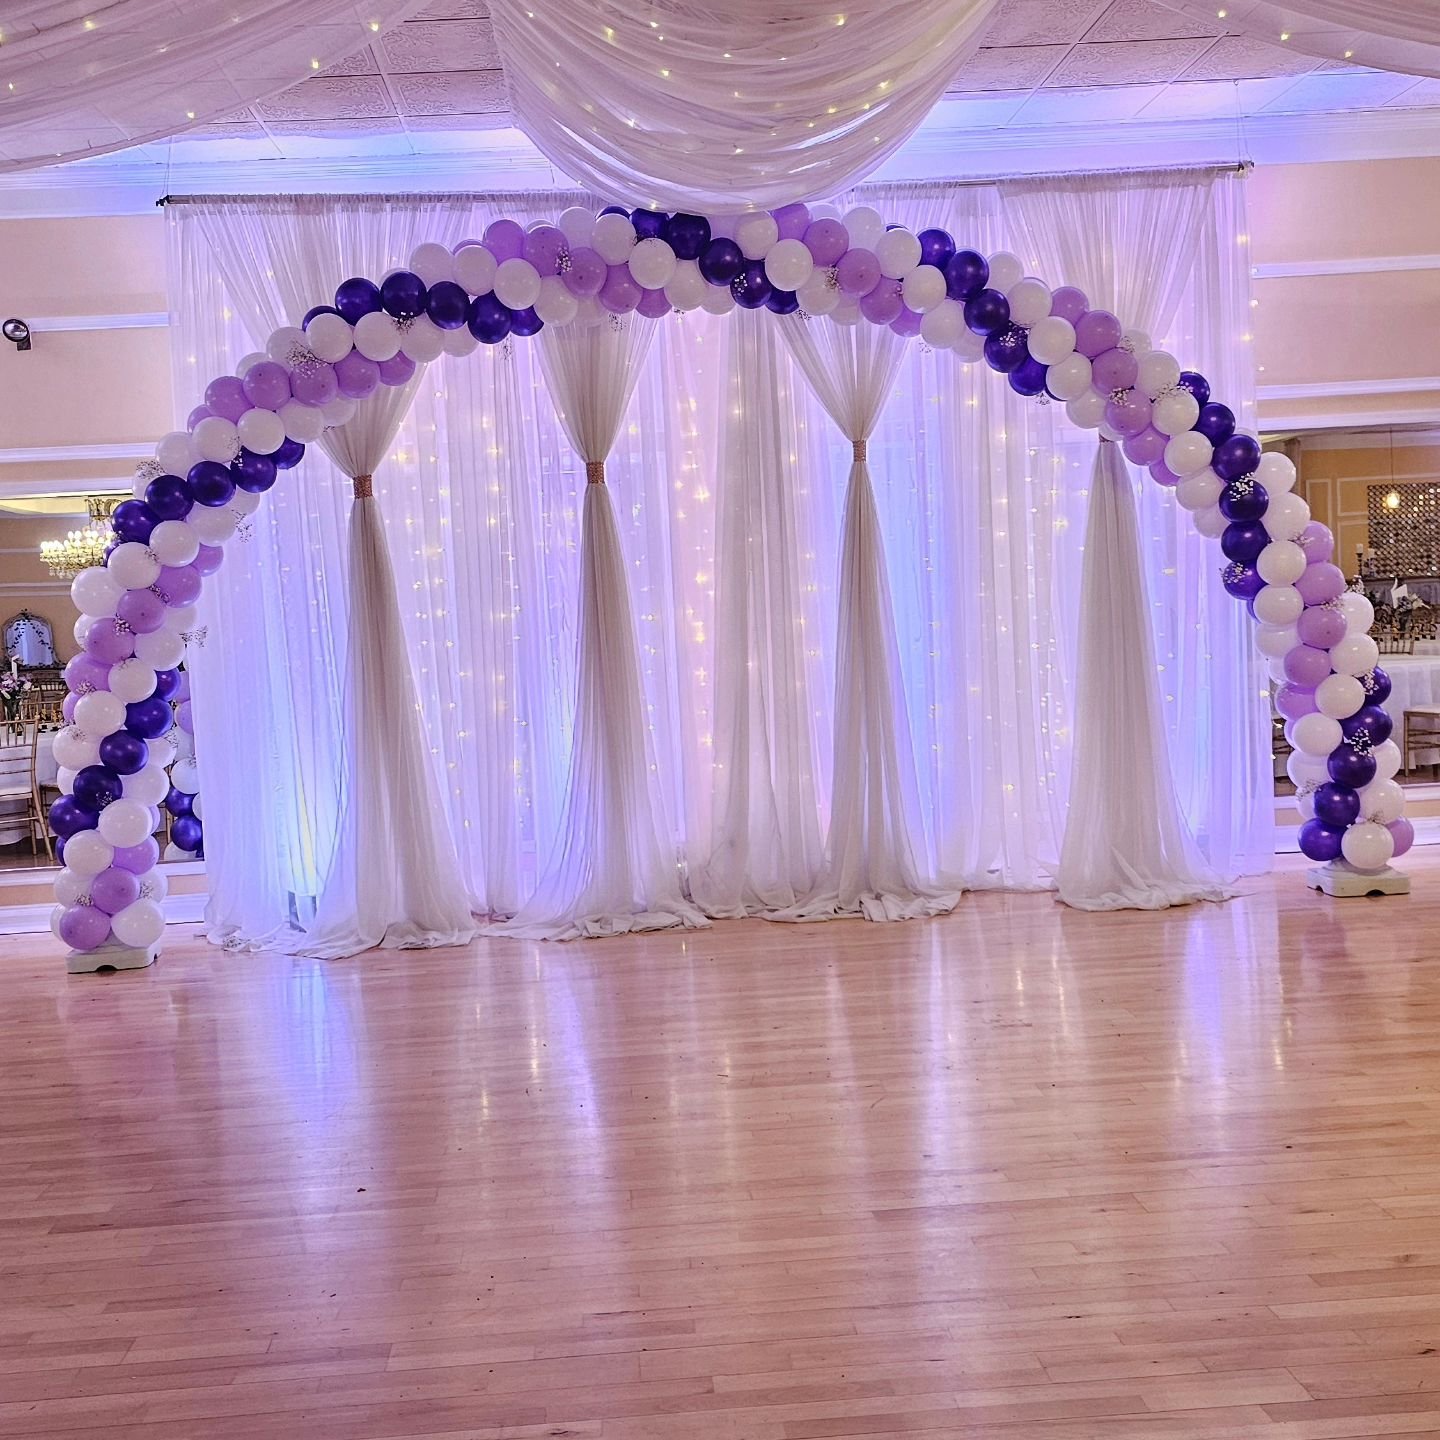 A classic arch is always a statement 

ABOUT US! 

𝙌𝙪𝙚𝙚𝙣𝙨 𝘿𝙚𝙘𝙤𝙧 is your party One . Stop . Shop! Located in Bristol pa. 

 Submit a quote via our website. Link in Boi, or call 215.550.1481 
 
Join our vendor membership and save 20% on ever